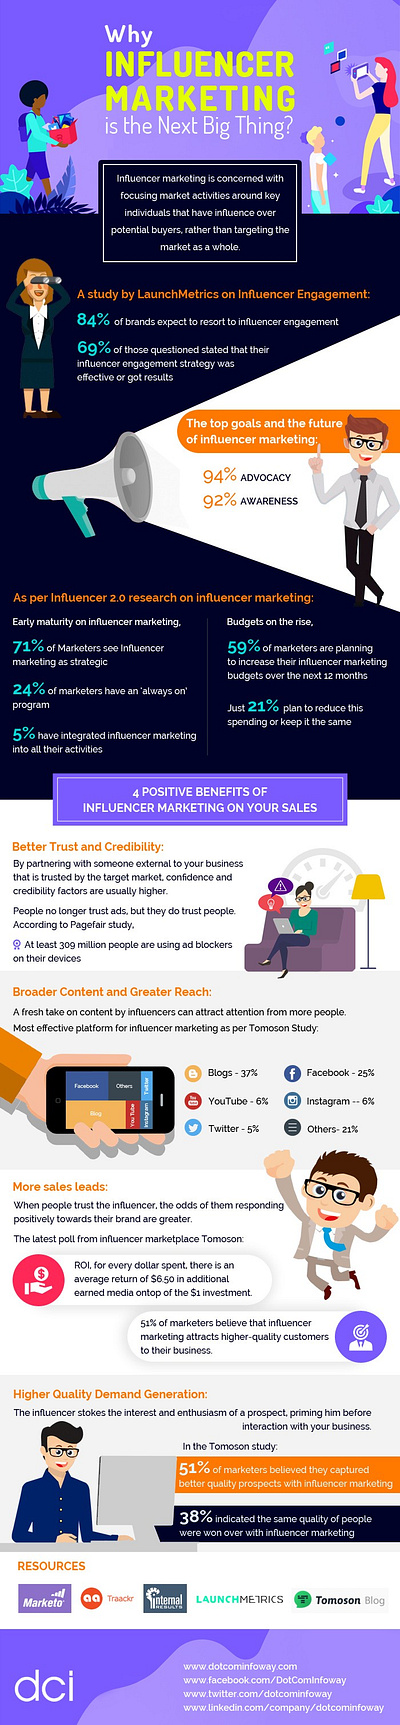 Why Influencer Marketing is the Next Big Thing? branding di digitalmarketing influencermarketing marketingstrategy search ranking factors smm socialmediamarkeing